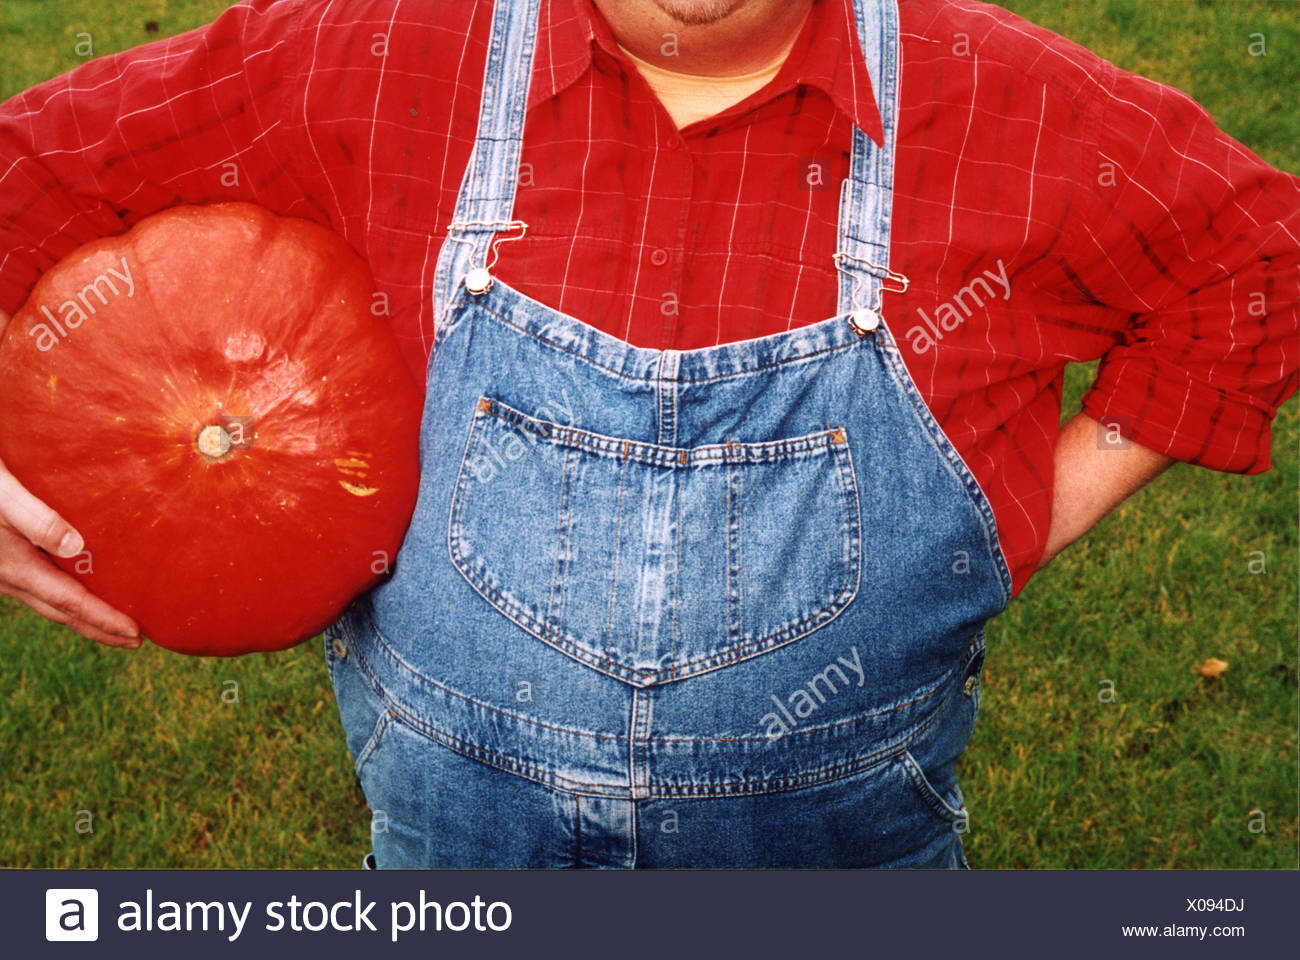 Overalls Man Overweight High Resolution Stock Photography and Images - Alamy